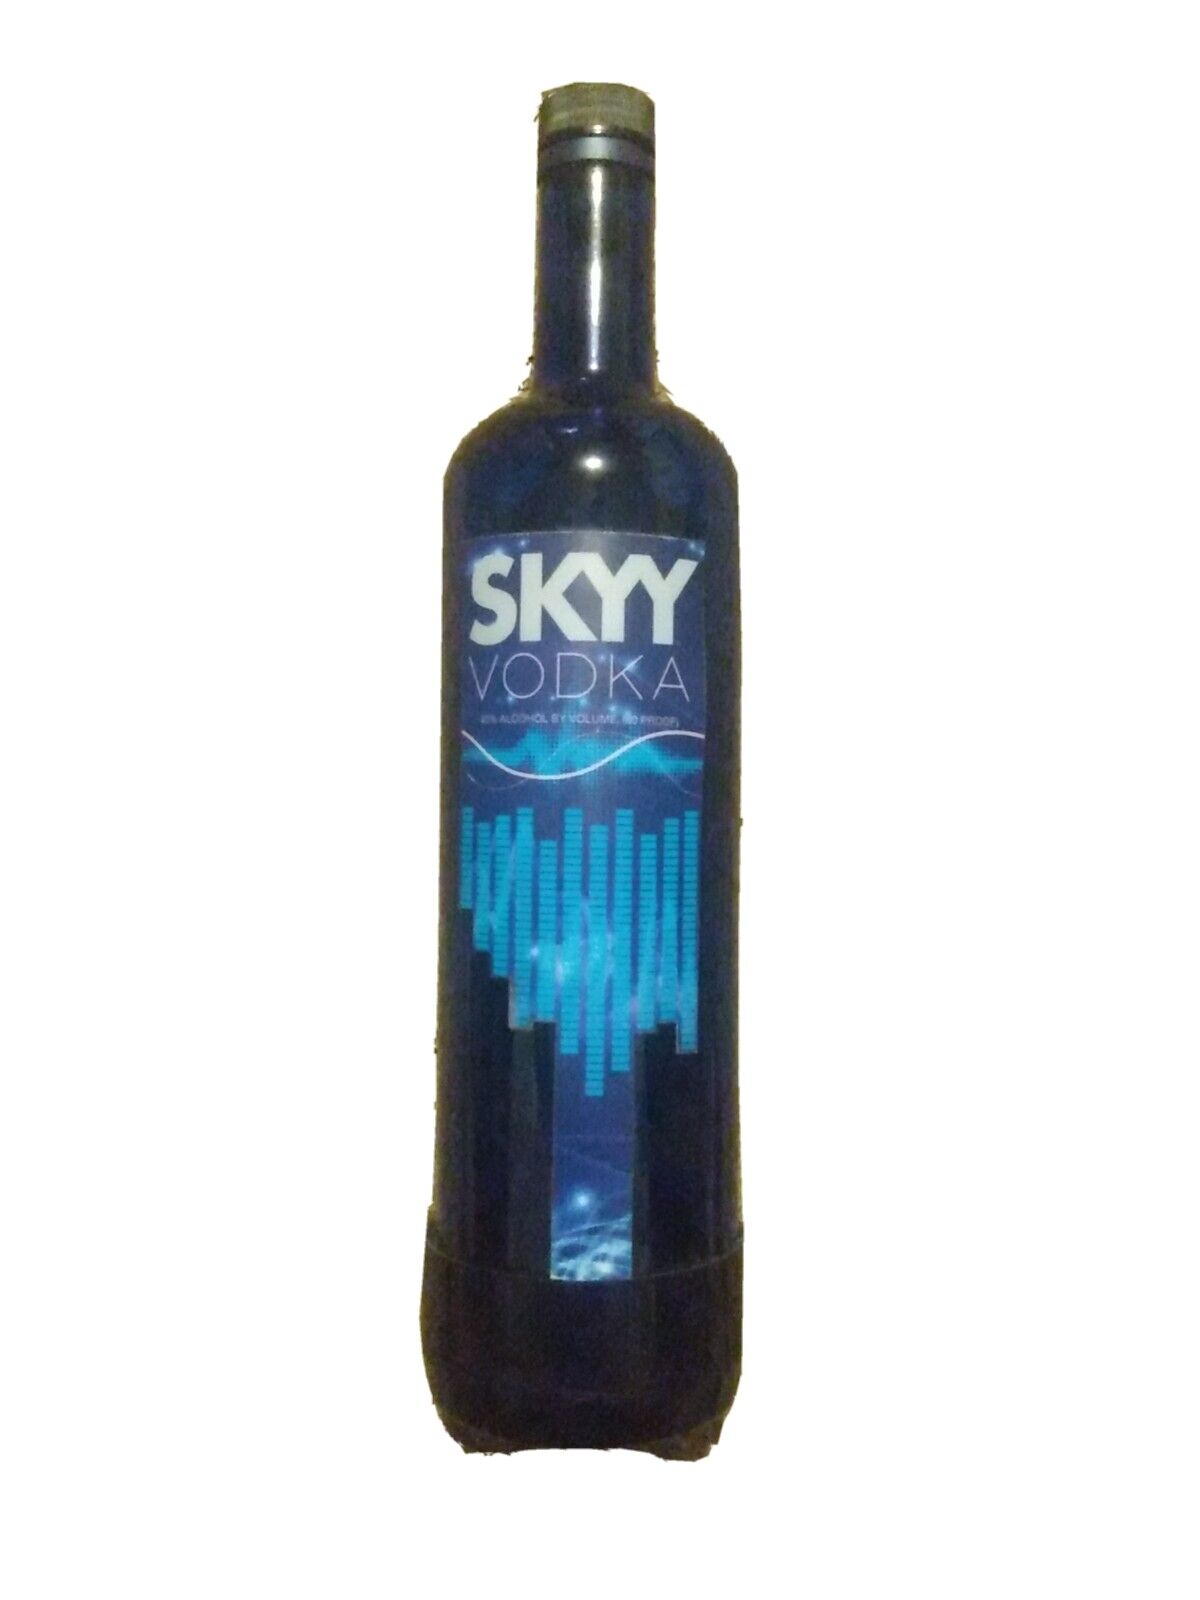 SKYY VODKA ELECTRICLY BOTTLE- ULTRA RARE-ONE OF A KIND